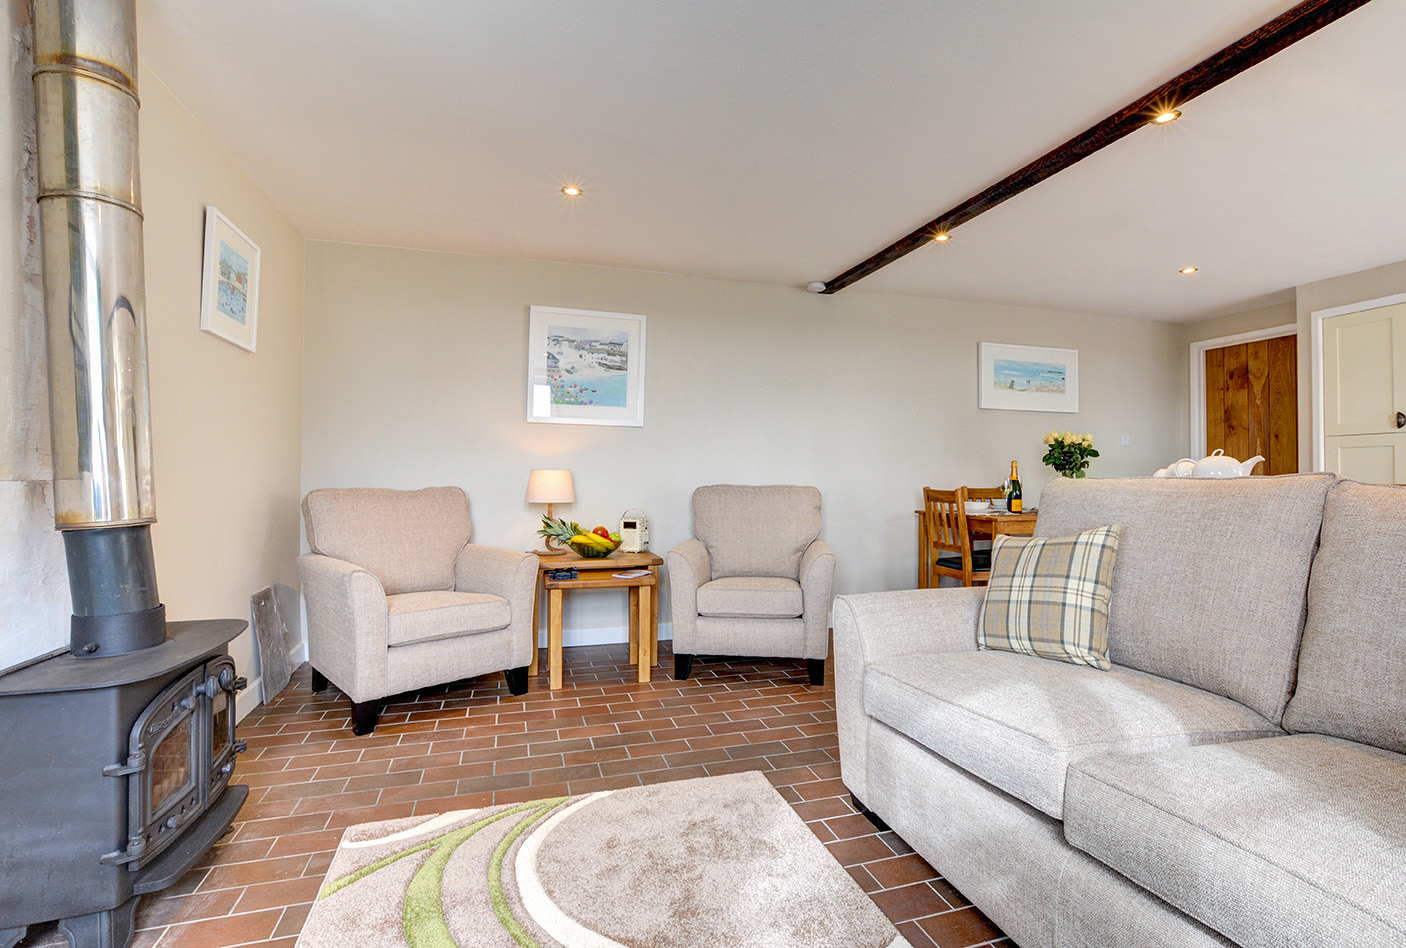 The lounge of Butterwell luxury self catering converted barn holiday cottage at Penrose Burden in North Cornwall 01.jpg